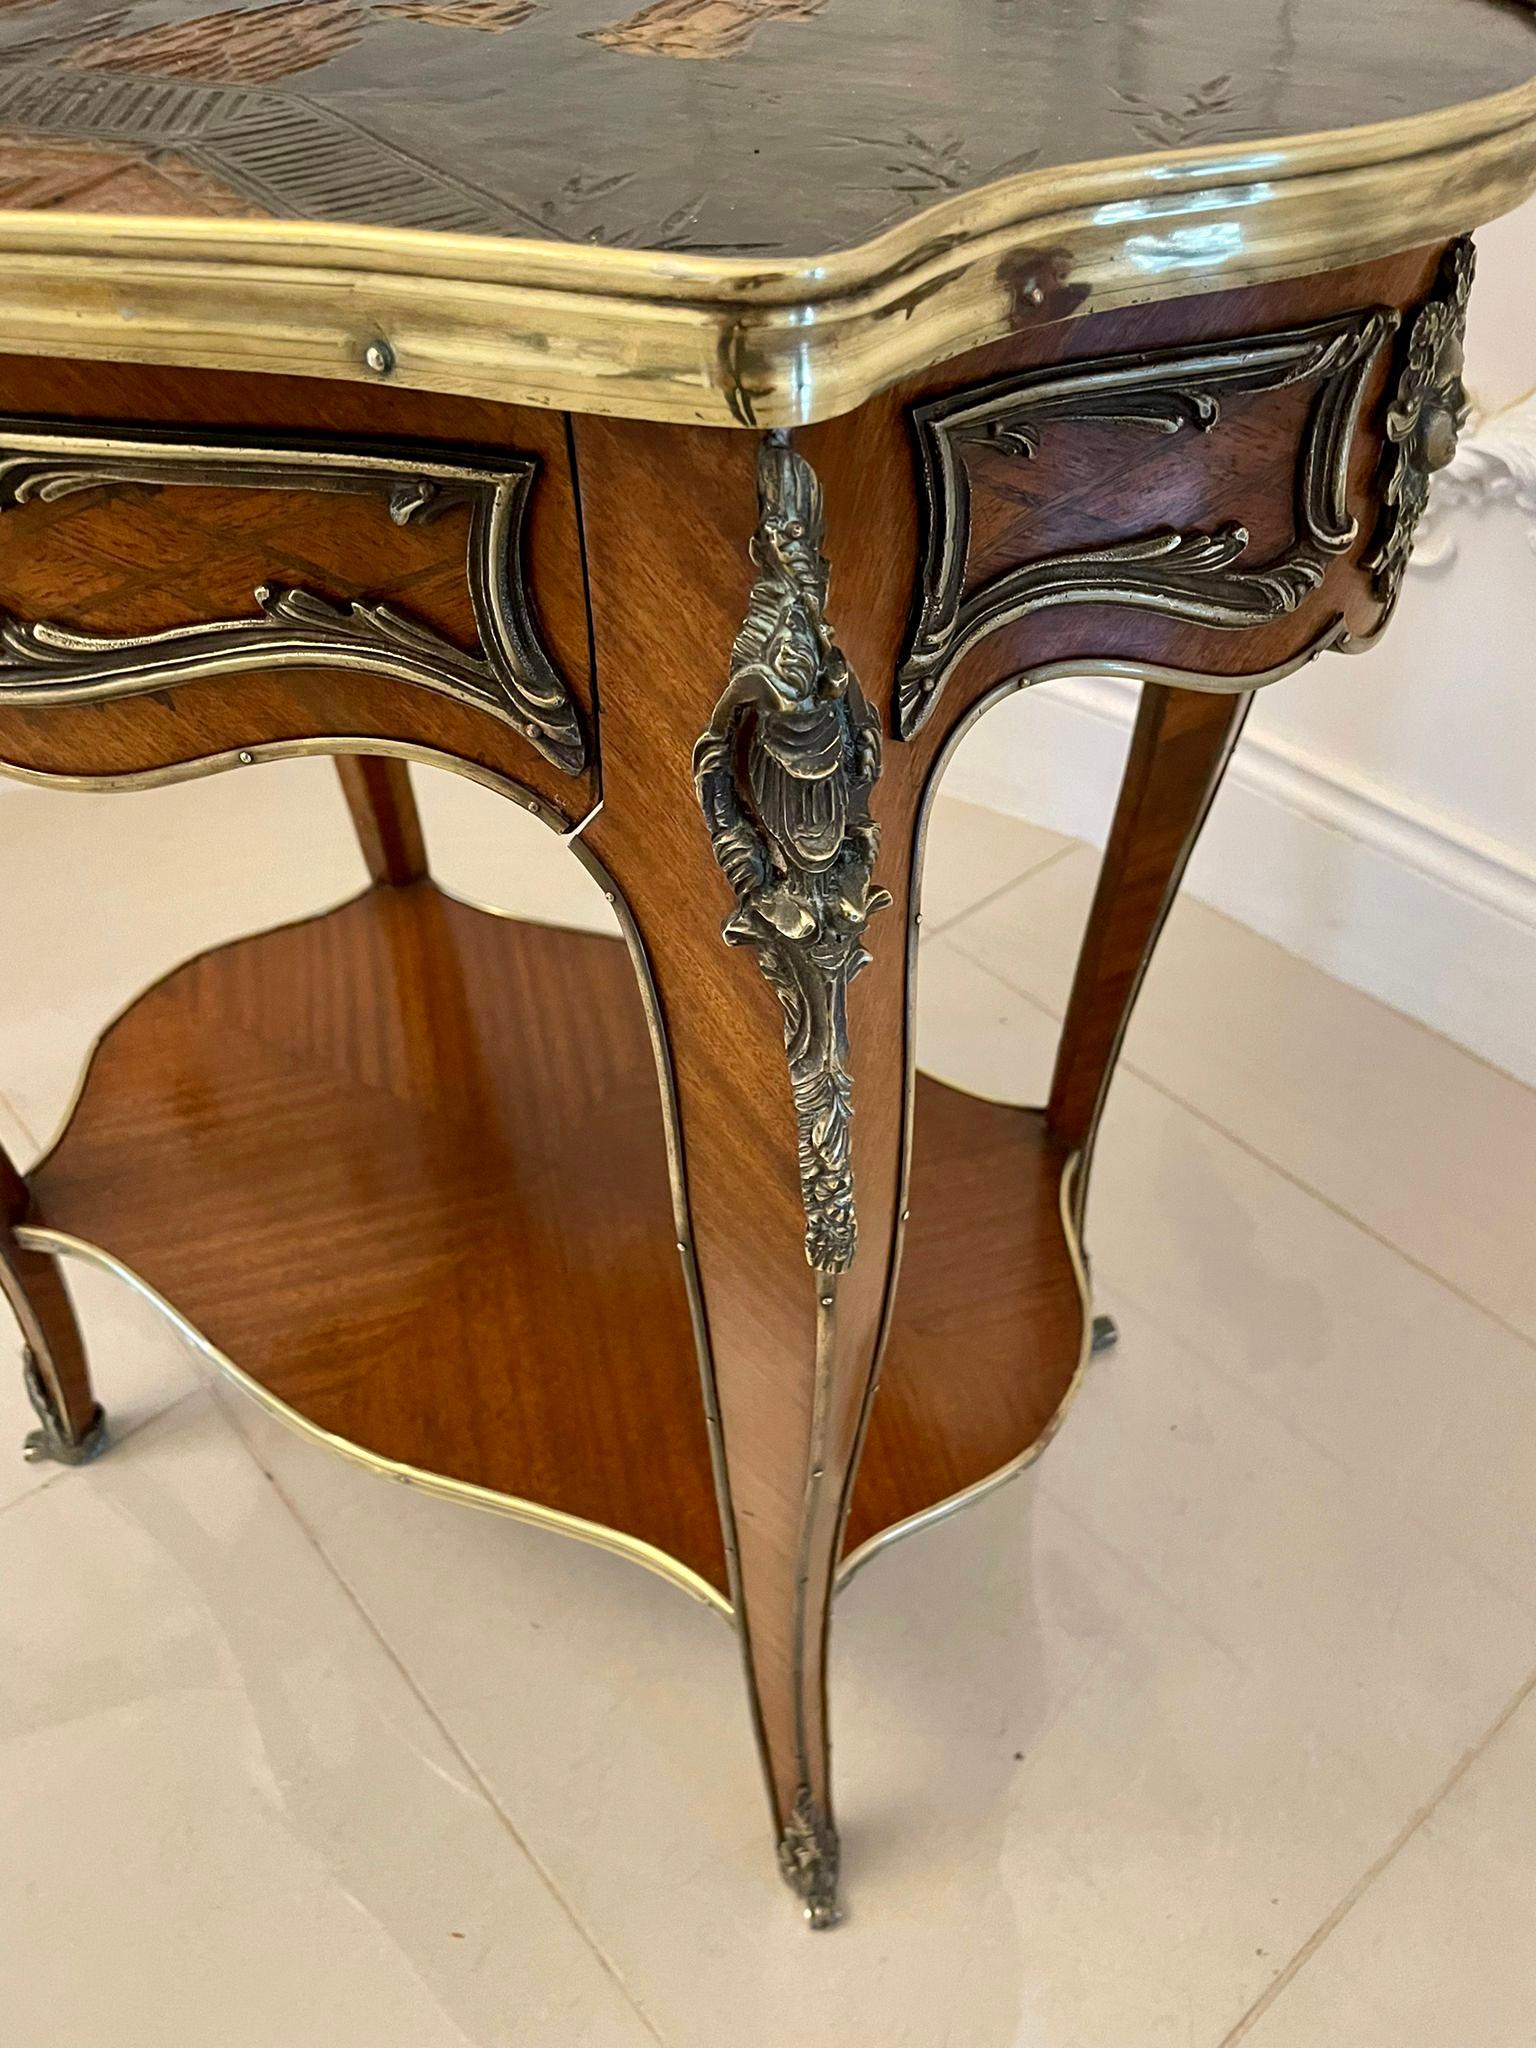 Outstanding Antique French Kingwood and Ormolu Mounted Freestanding Centre Table For Sale 2